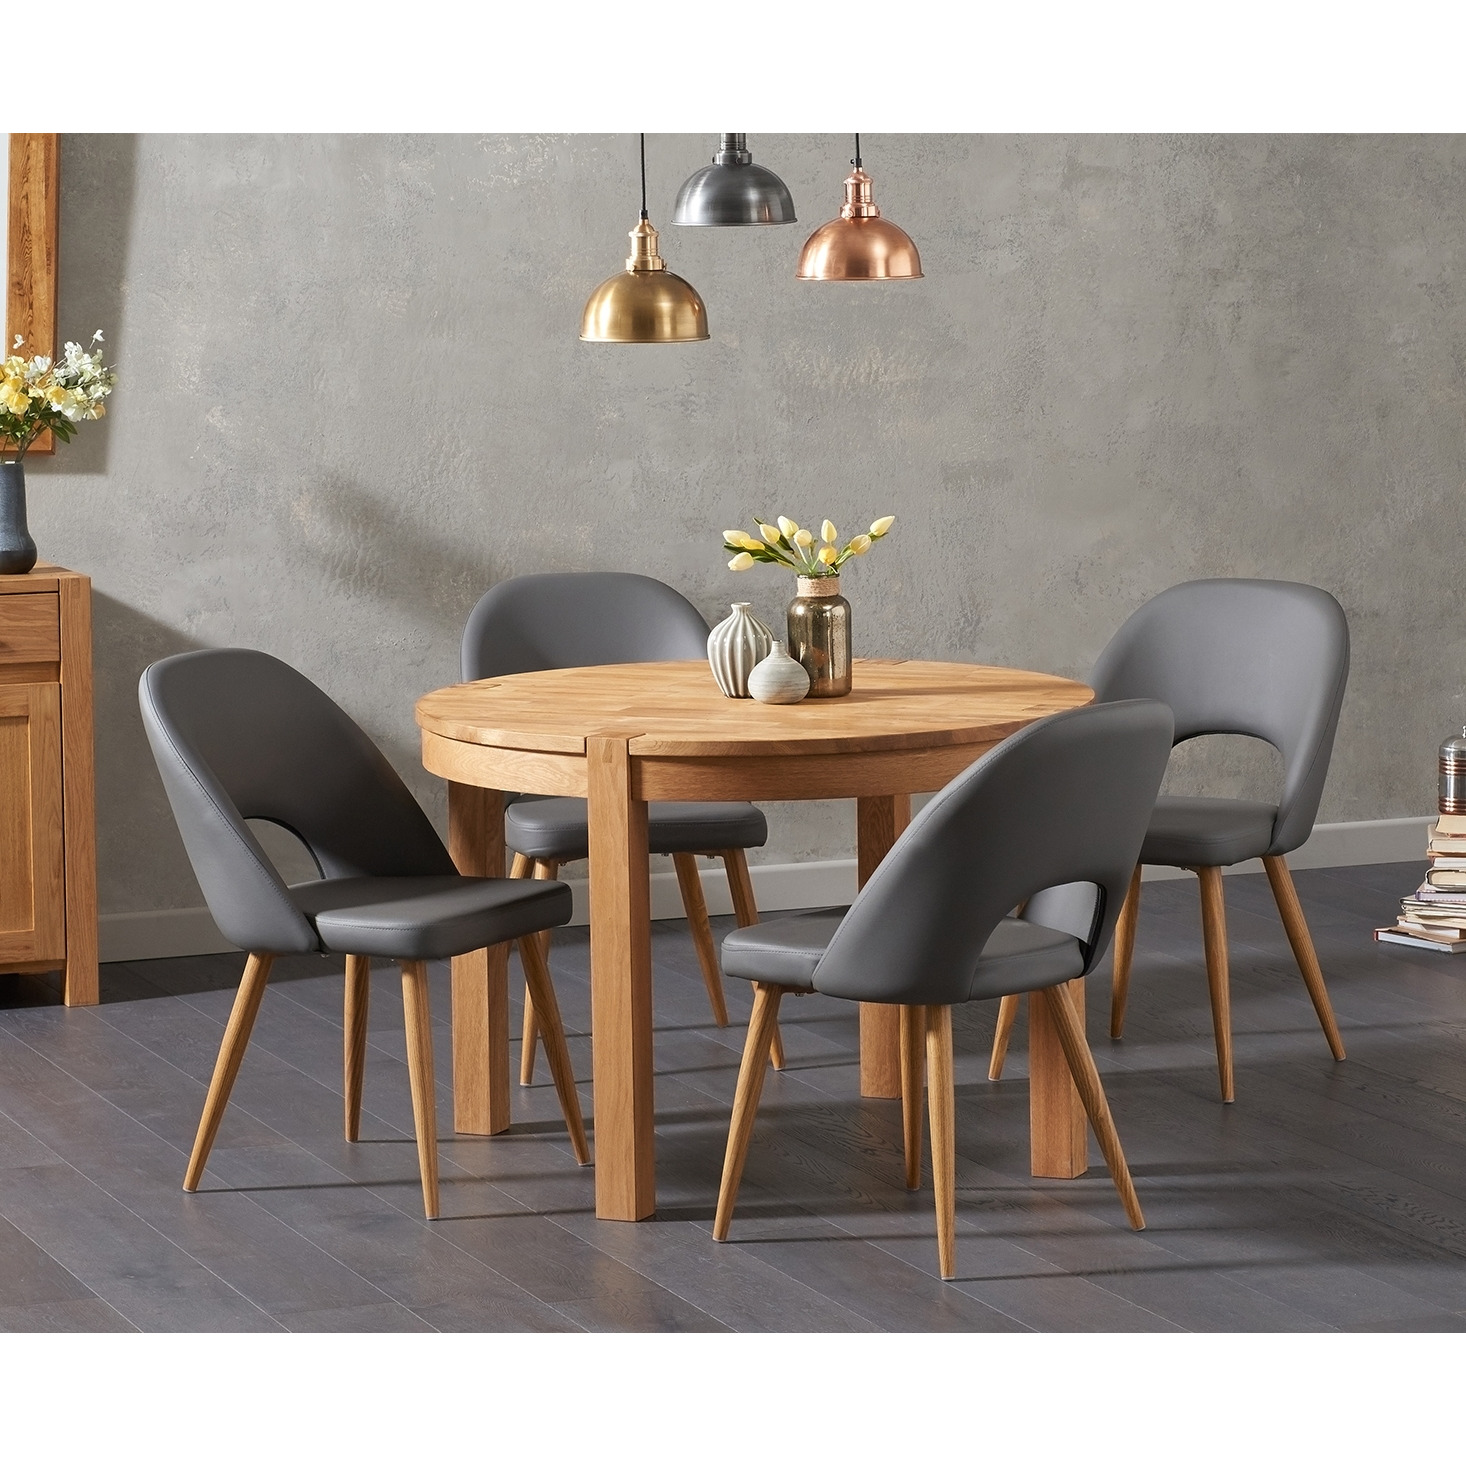 Verona 110cm Oak Round Dining Table with Halifax Faux Leather Chairs